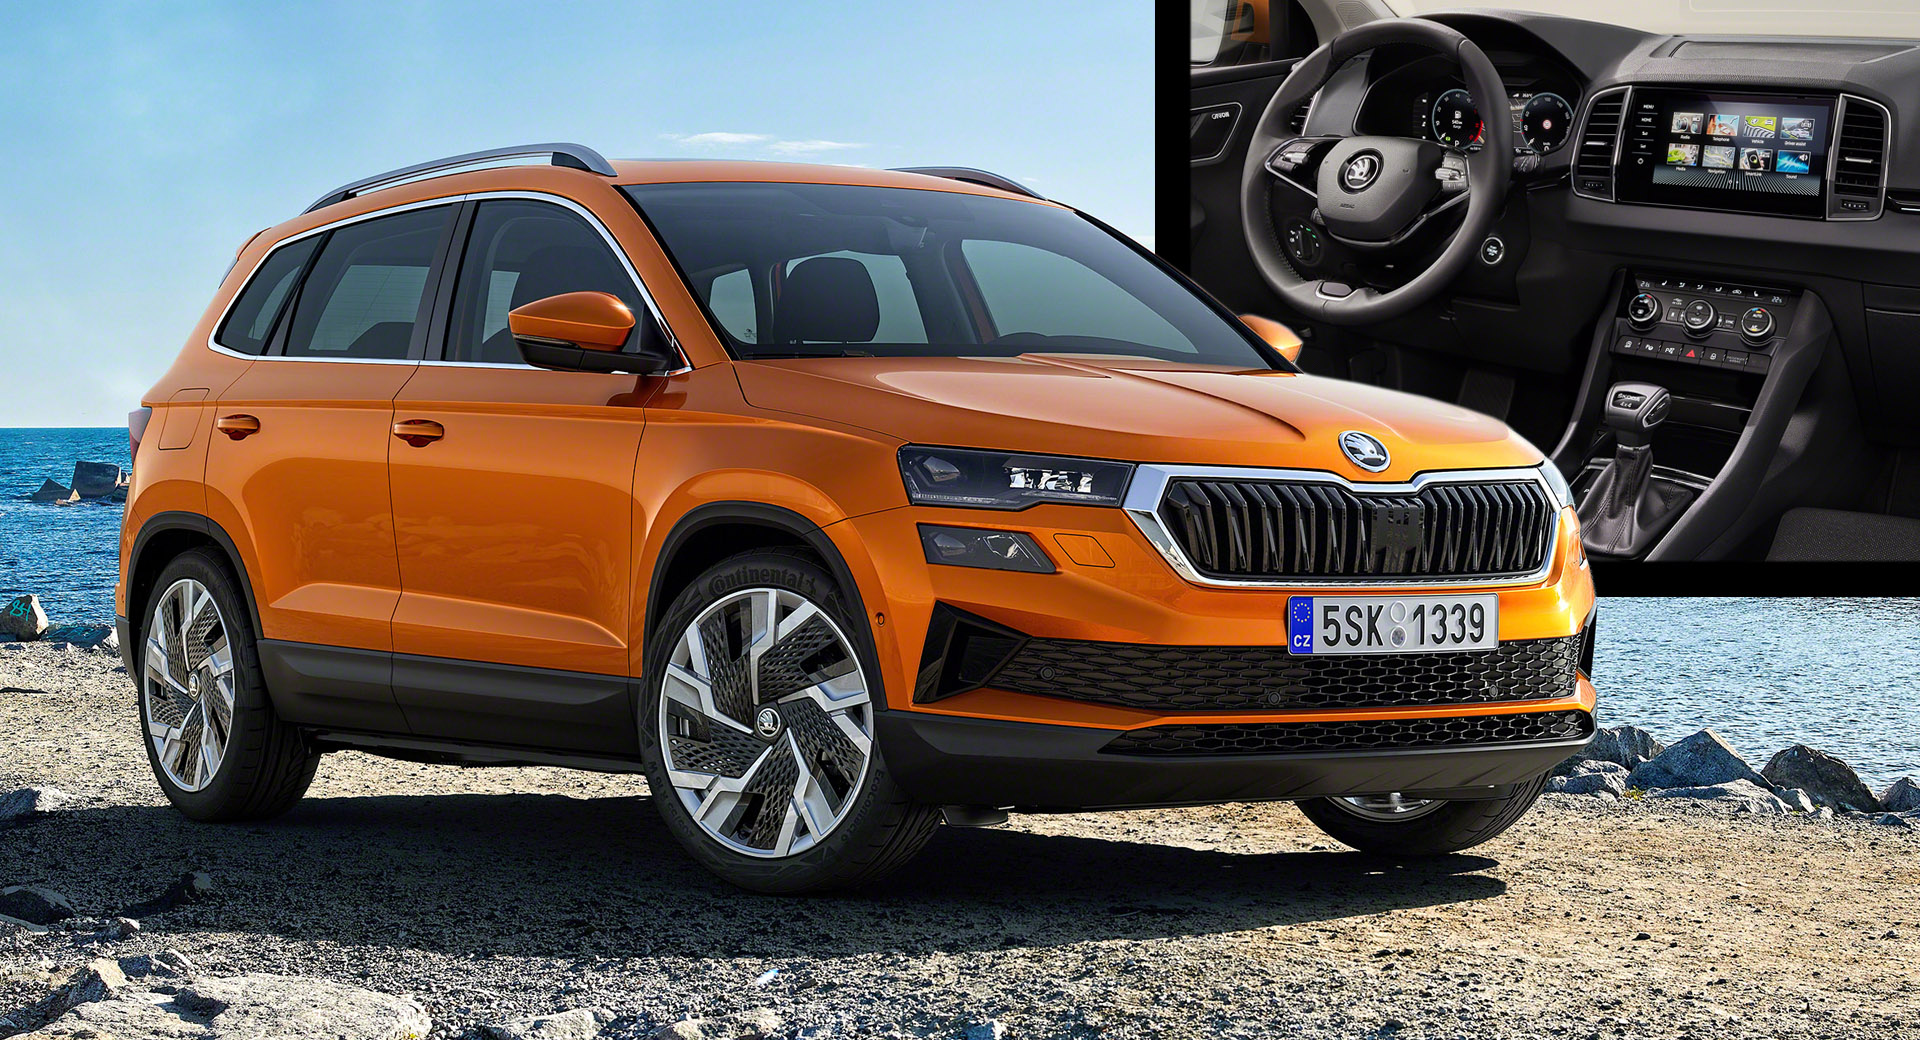 The updated 2022 Skoda Karoq add more tech, more safety